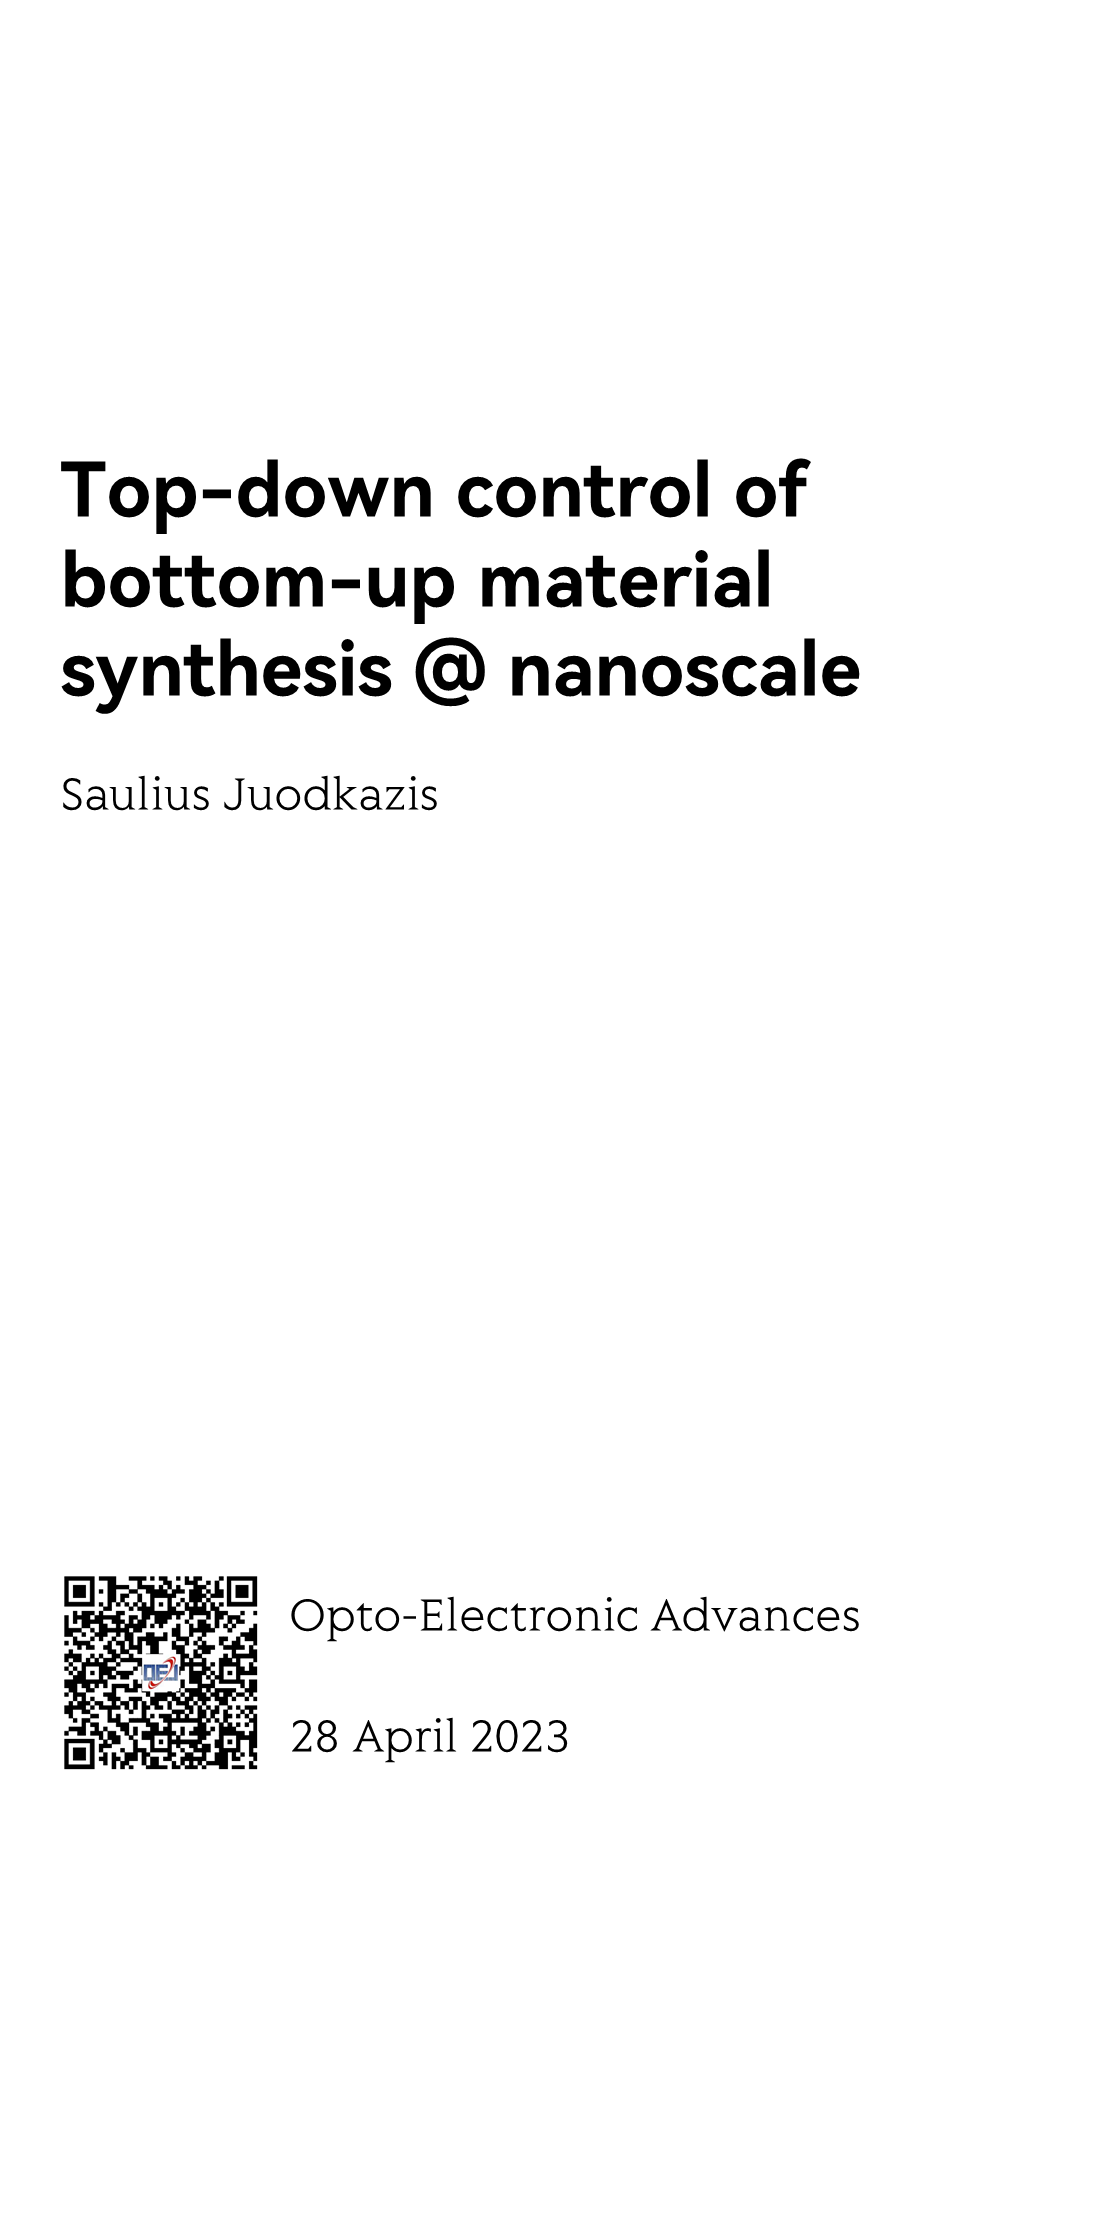 Top-down control of bottom-up material synthesis @ nanoscale_1